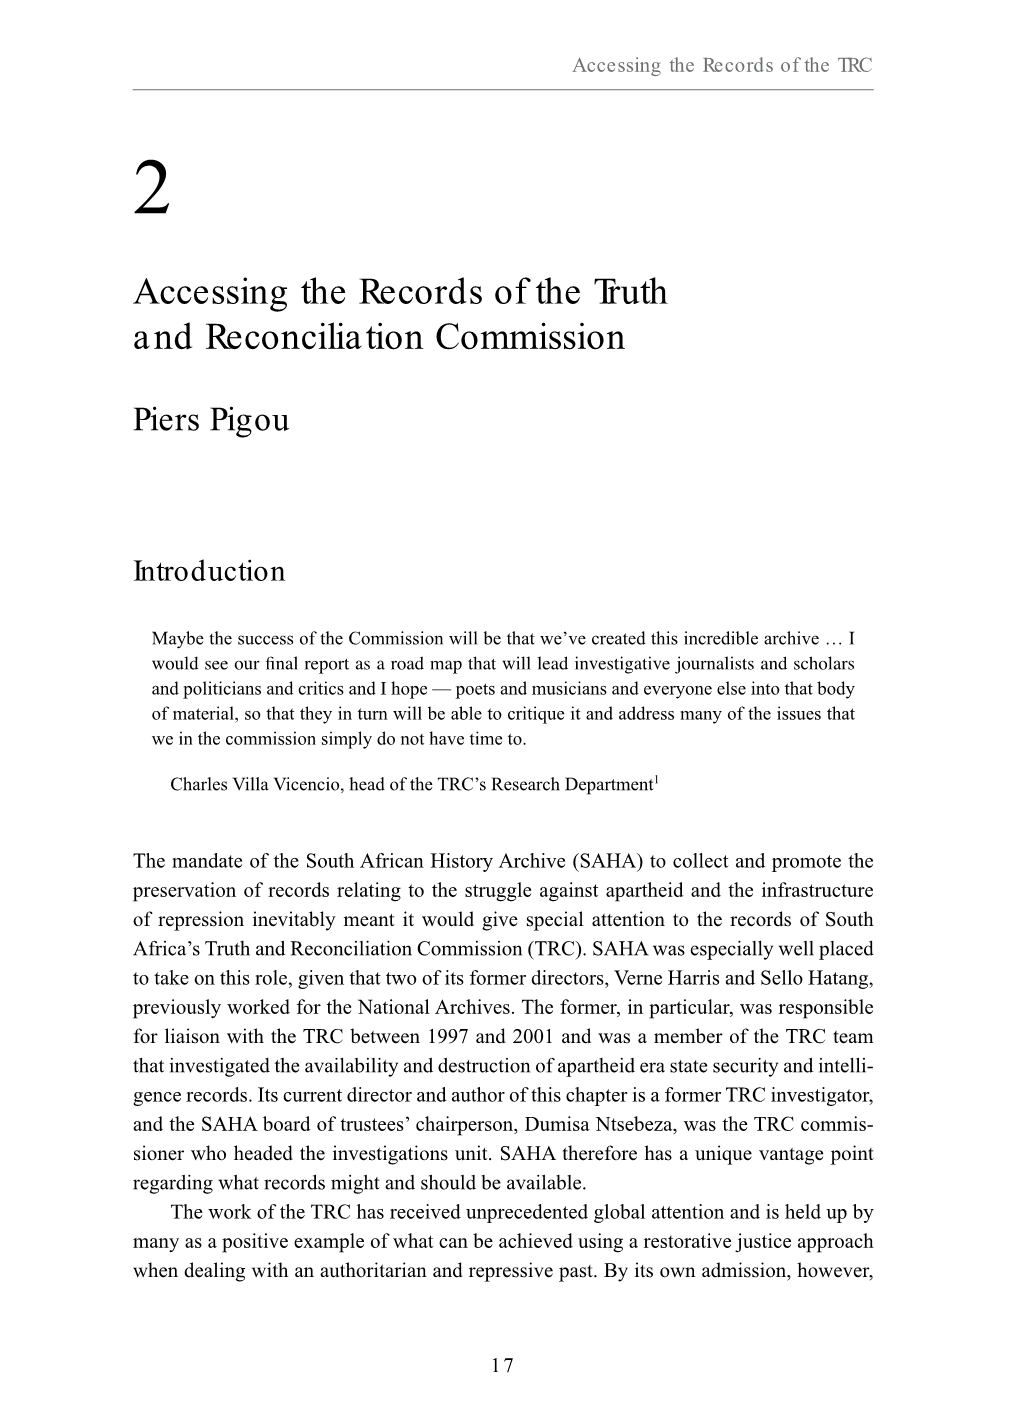 Accessing the Records of the Truth and Reconciliation Commission